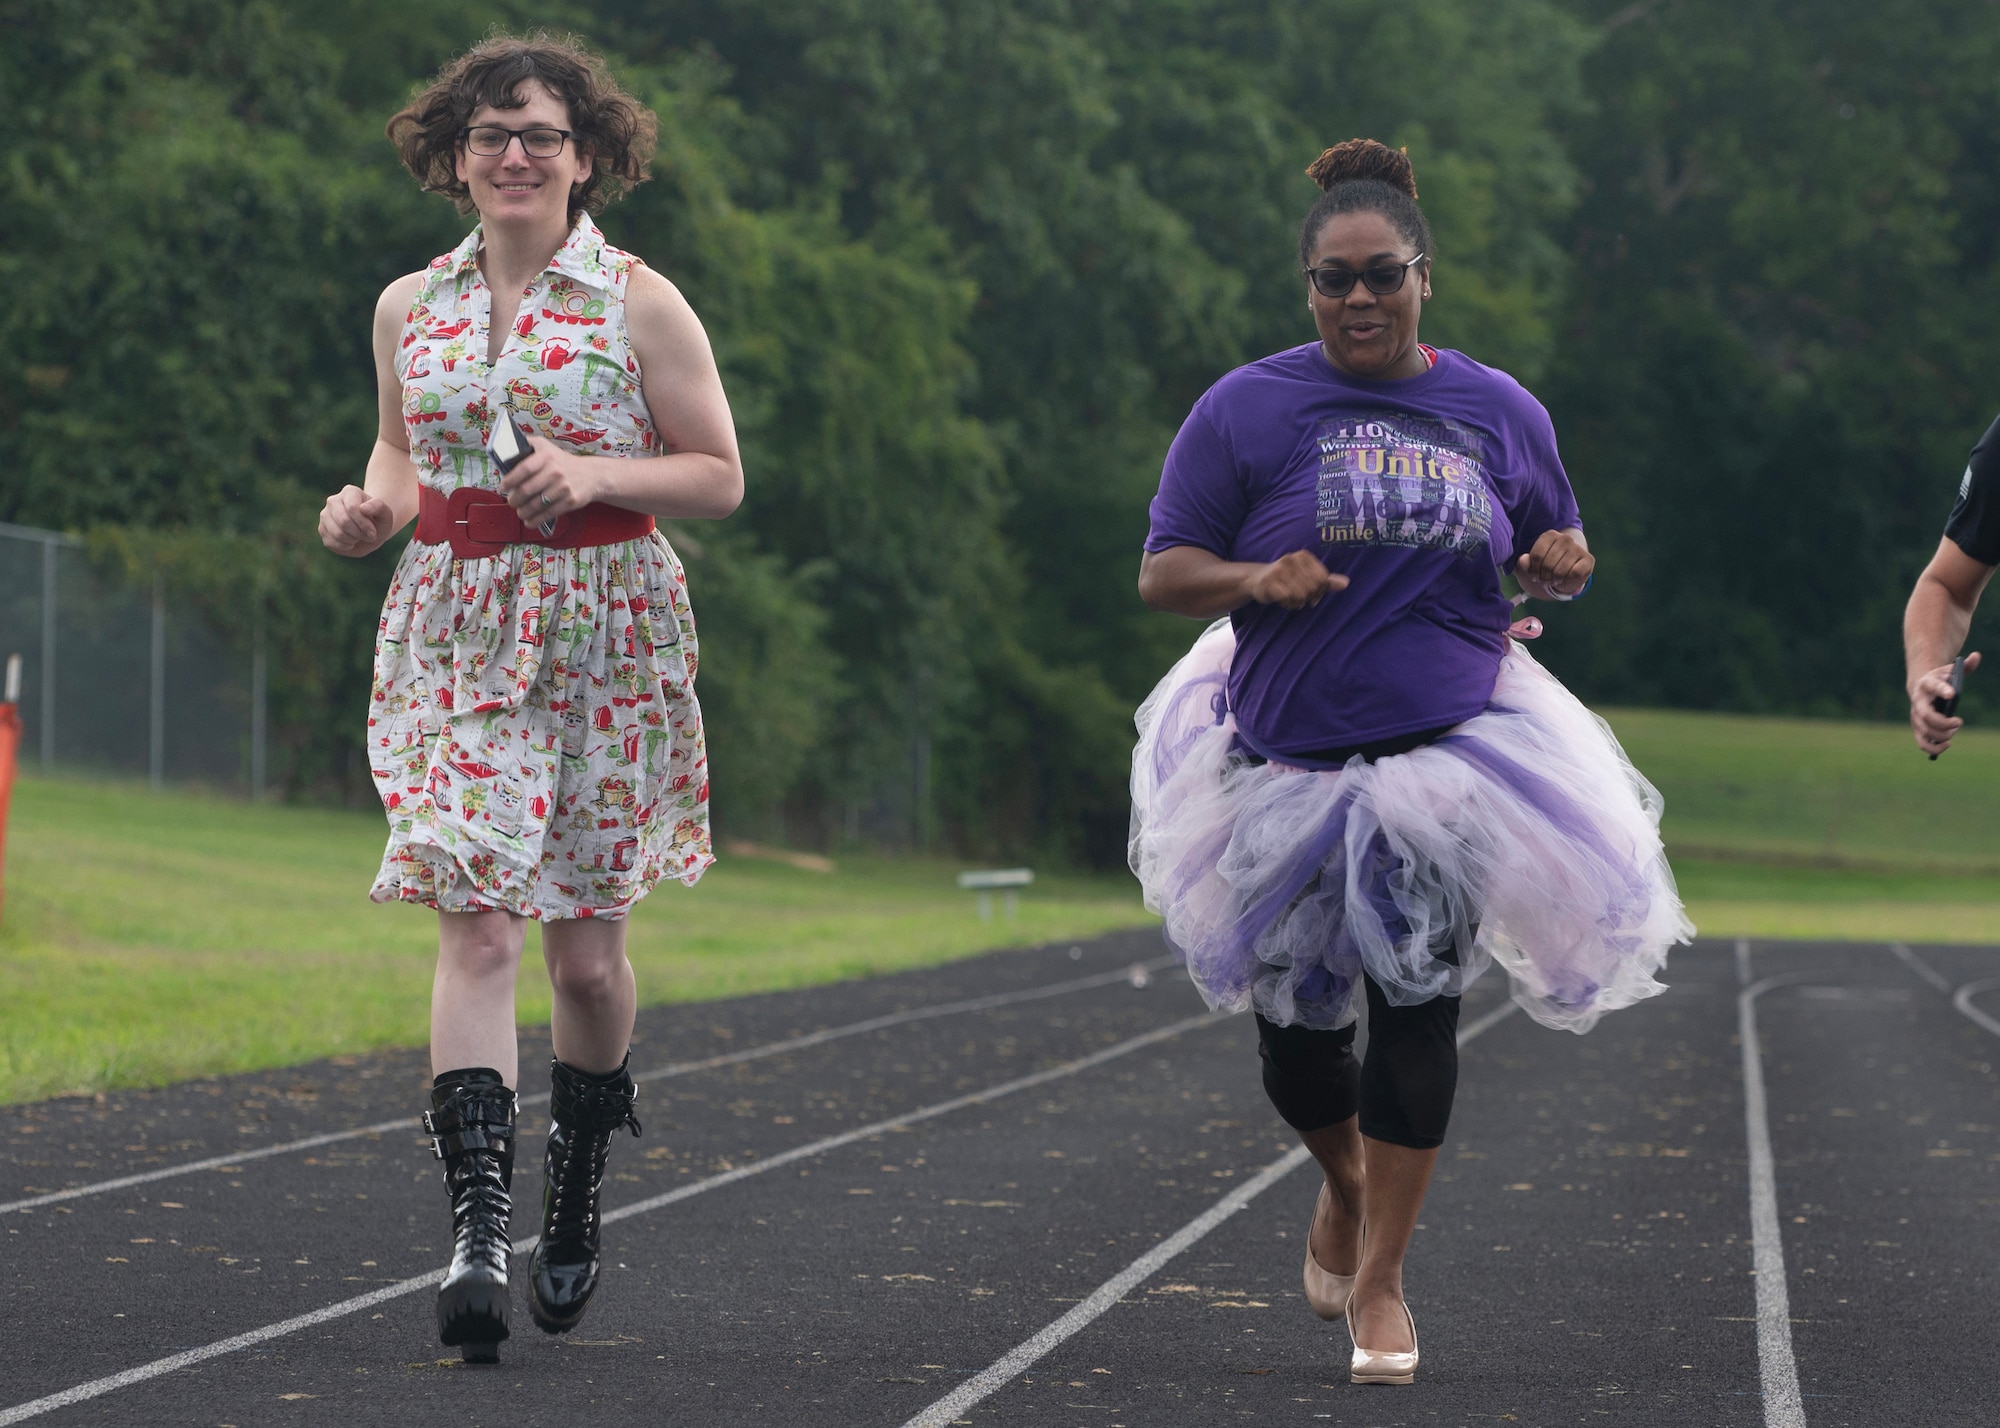 Two women run on a track